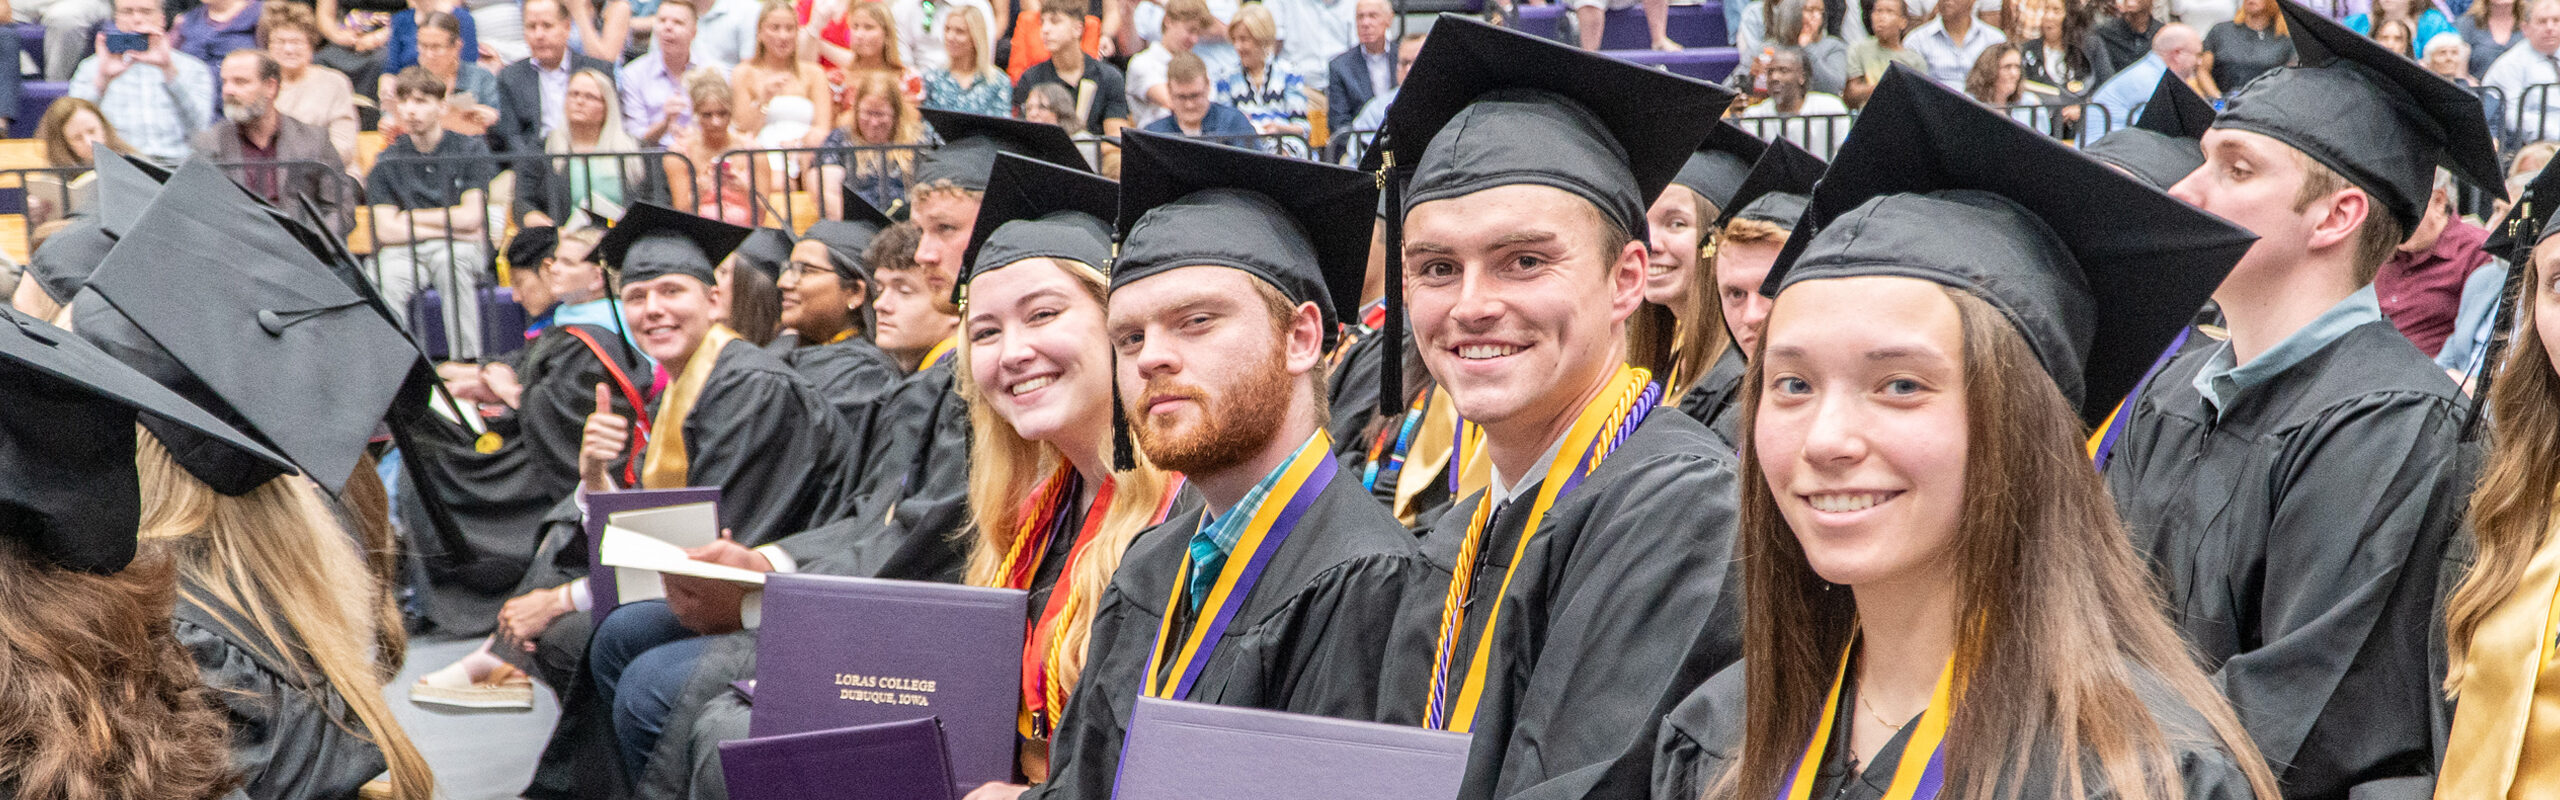 Proud Loras College Student during commencement